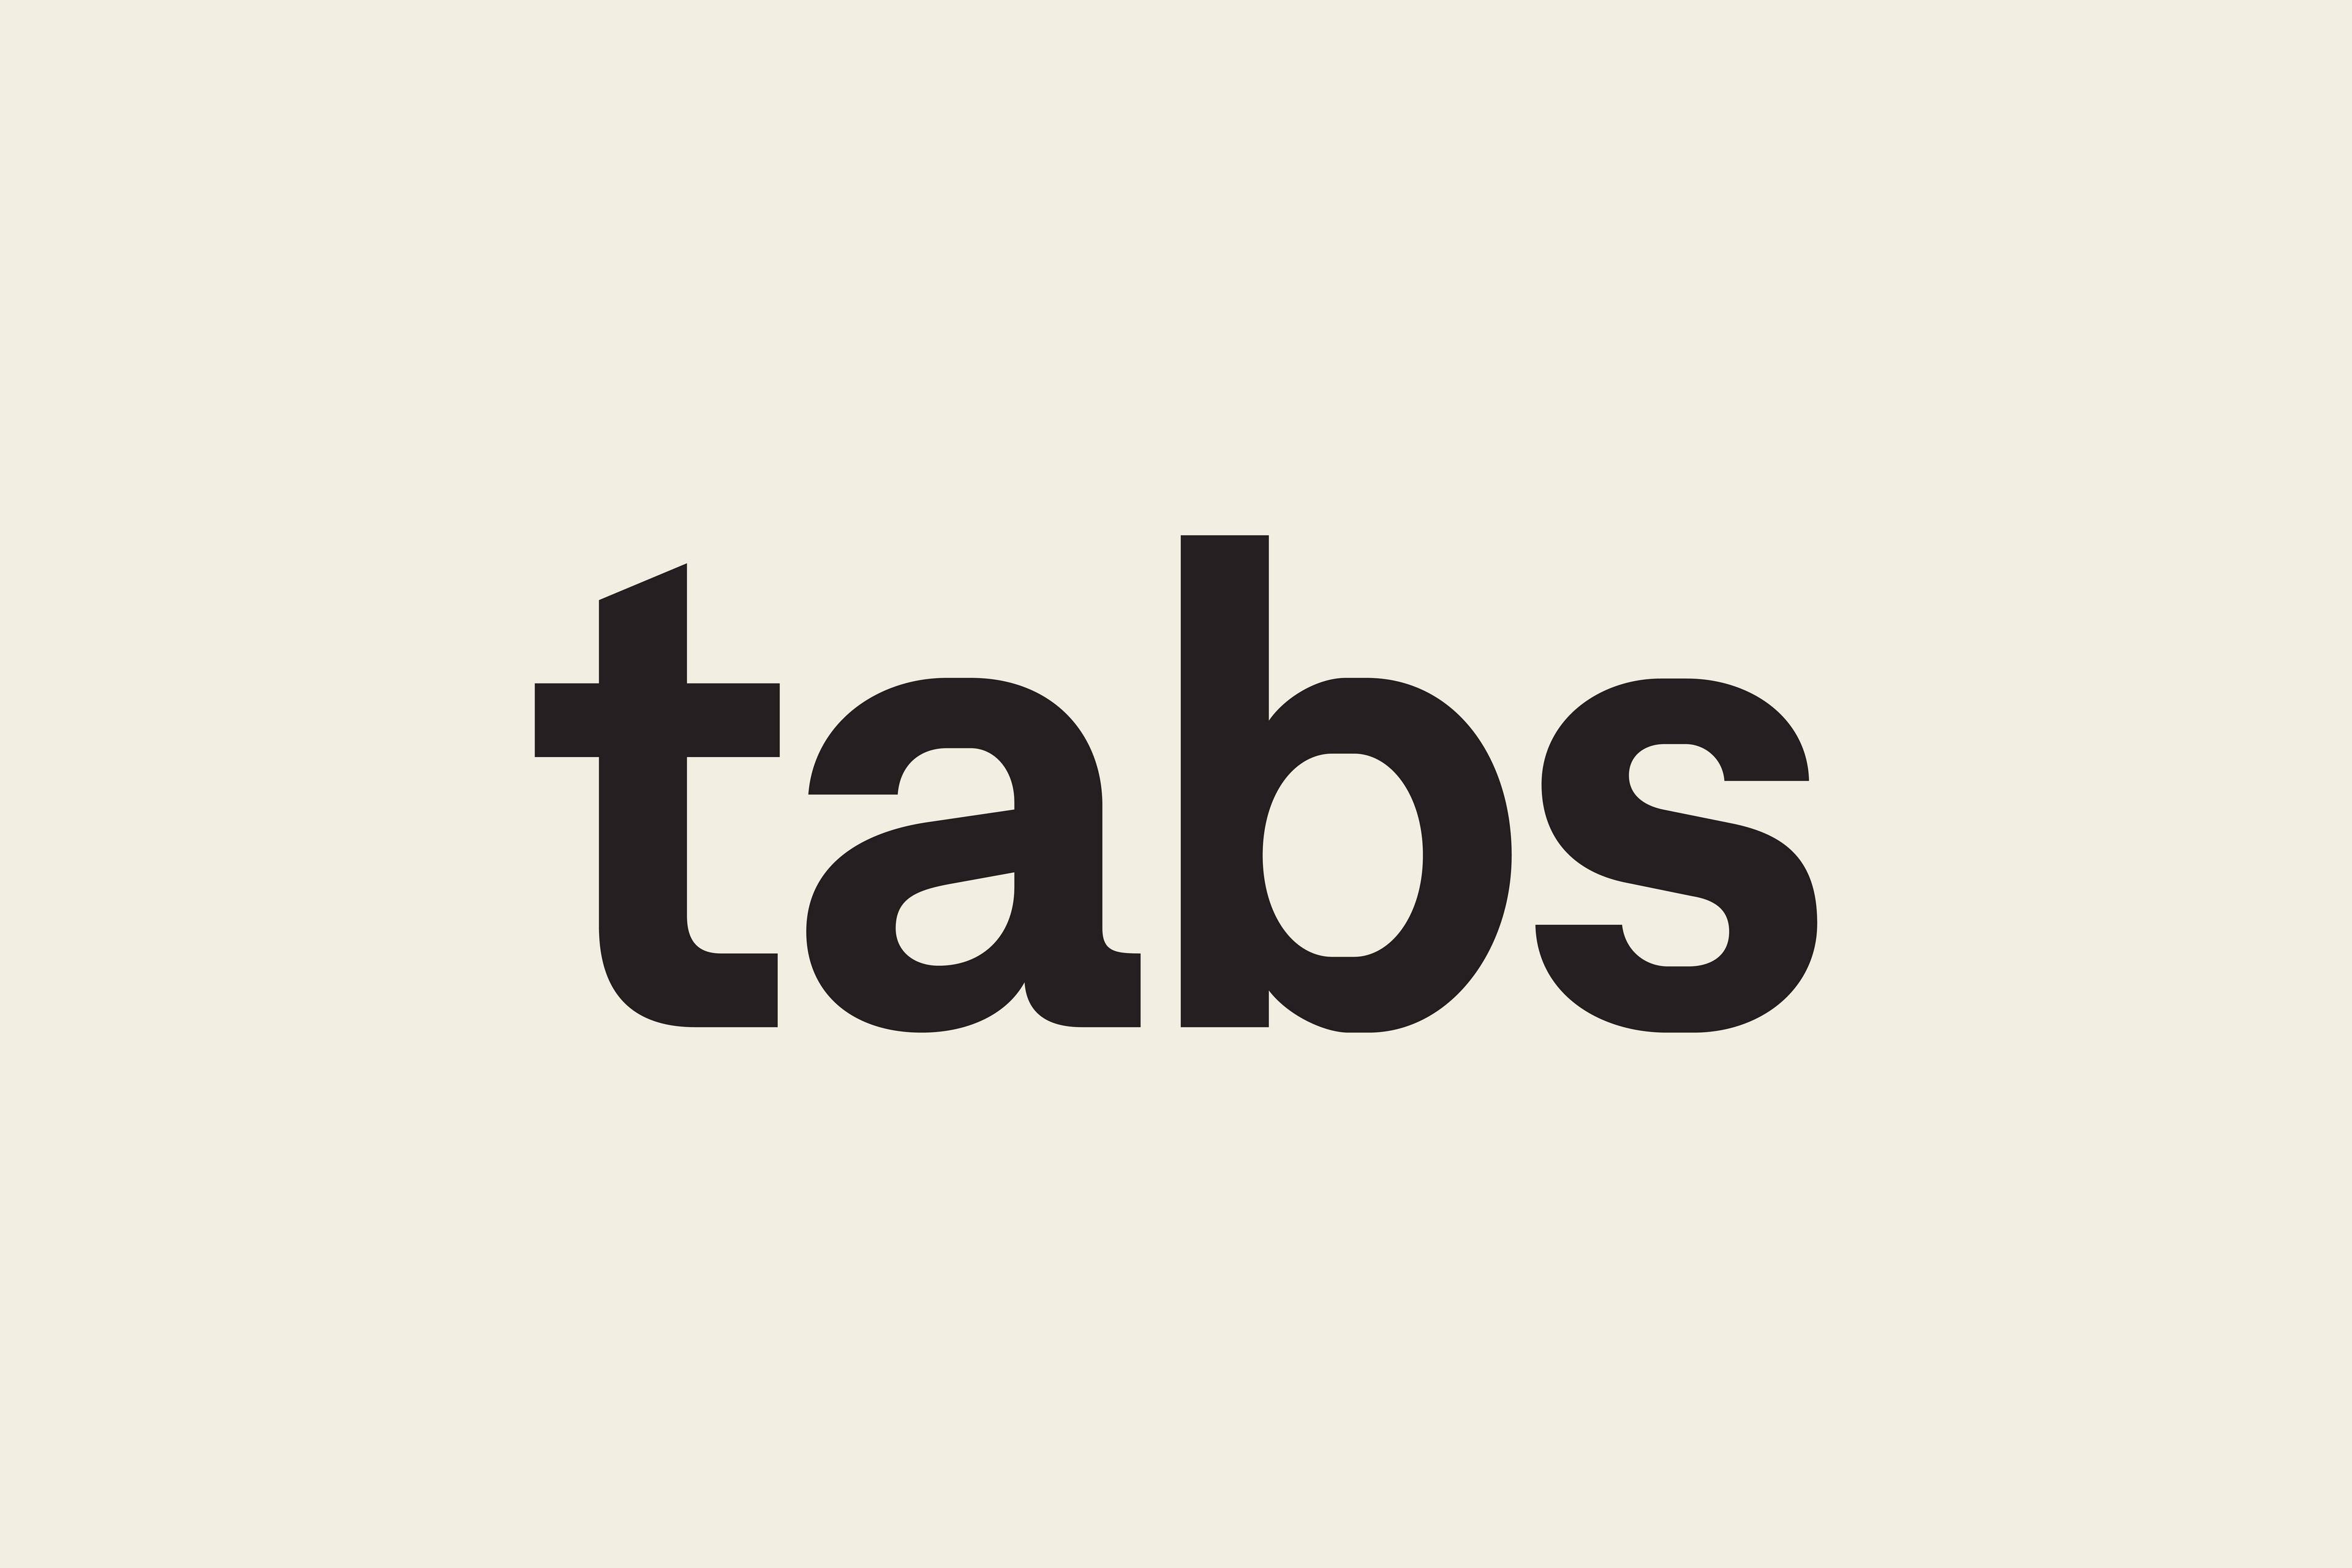 Two Are - Tabs